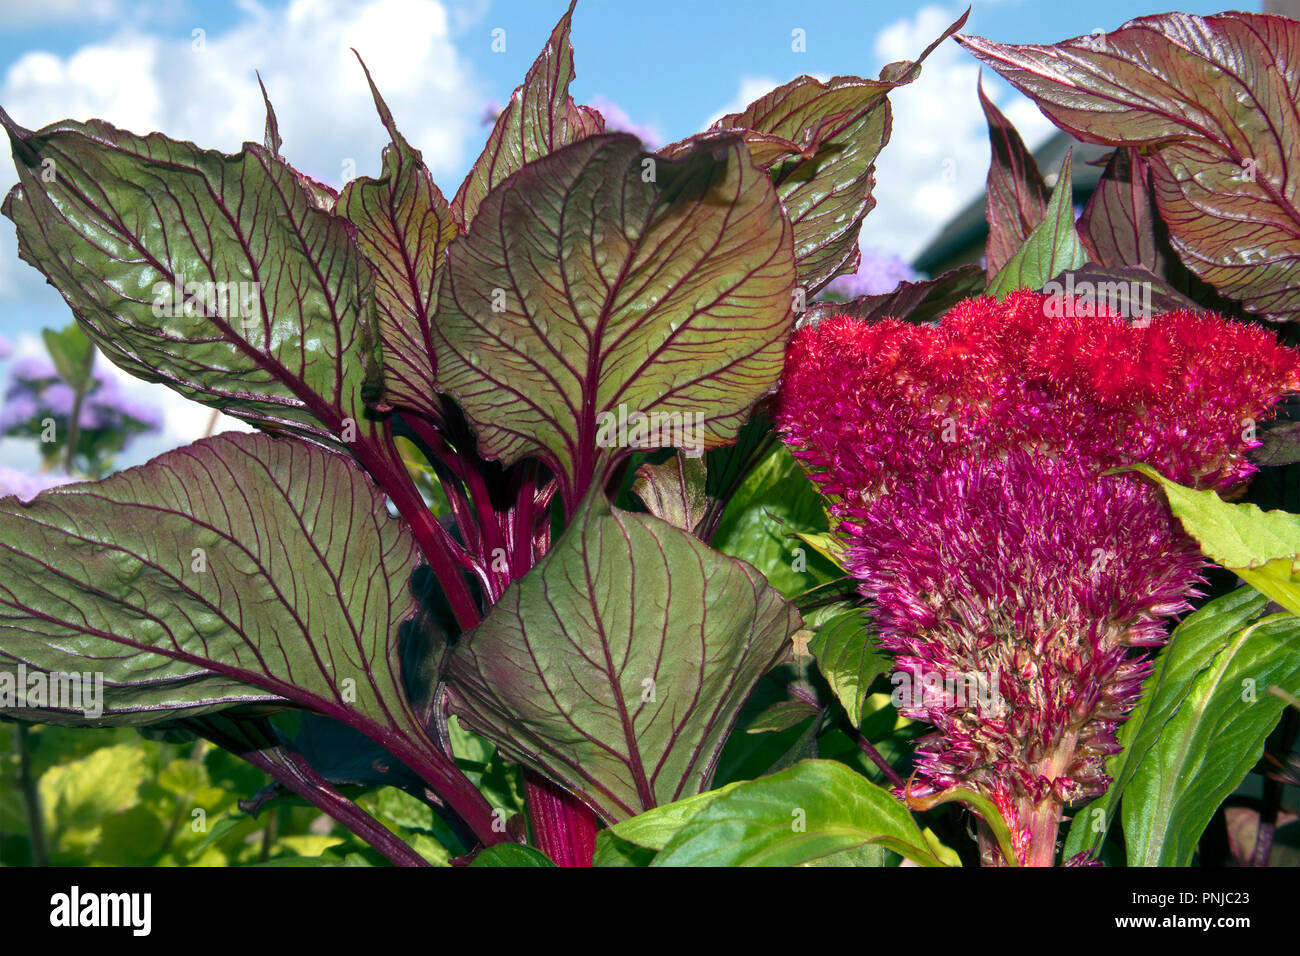 Beautiful flower of purple garden Celosia cristata against green leaves with burgundy streaks Stock Photo